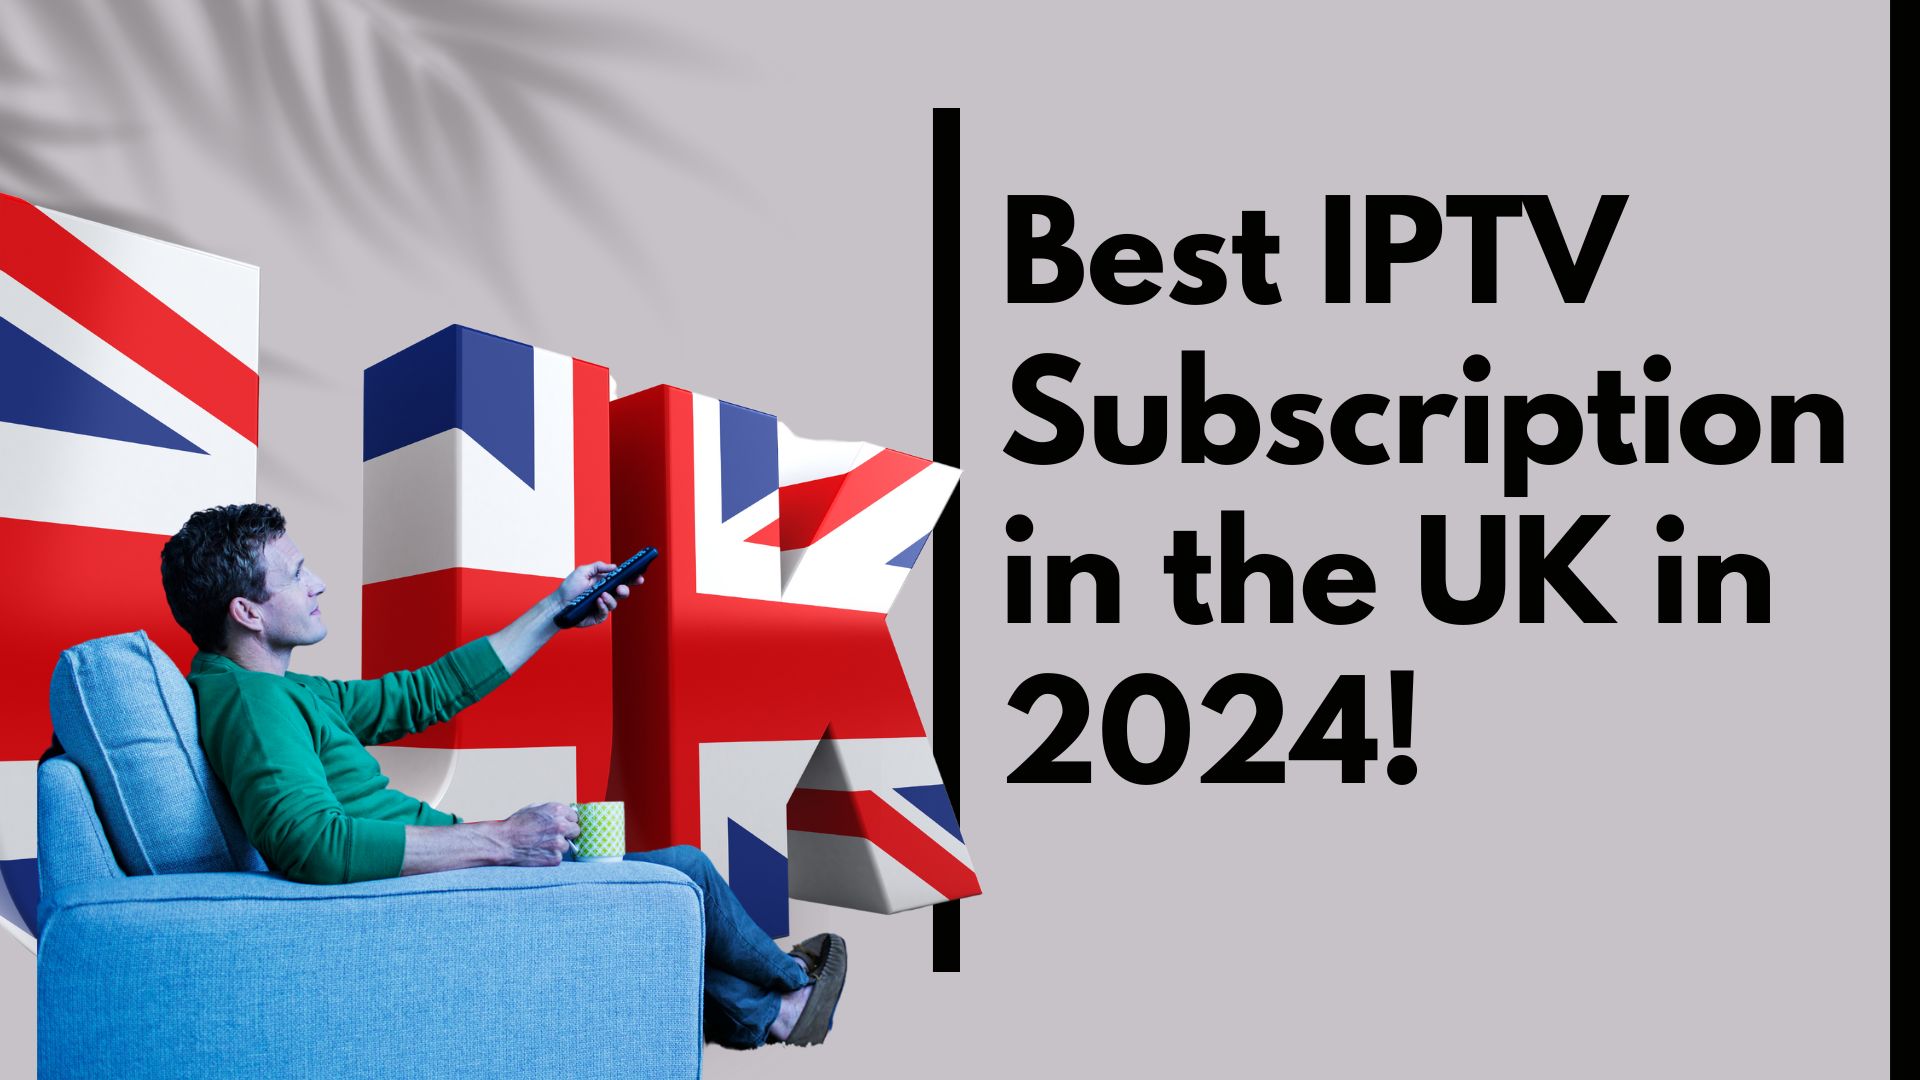 How to Secure the Best IPTV Subscription in the UK in 2024?